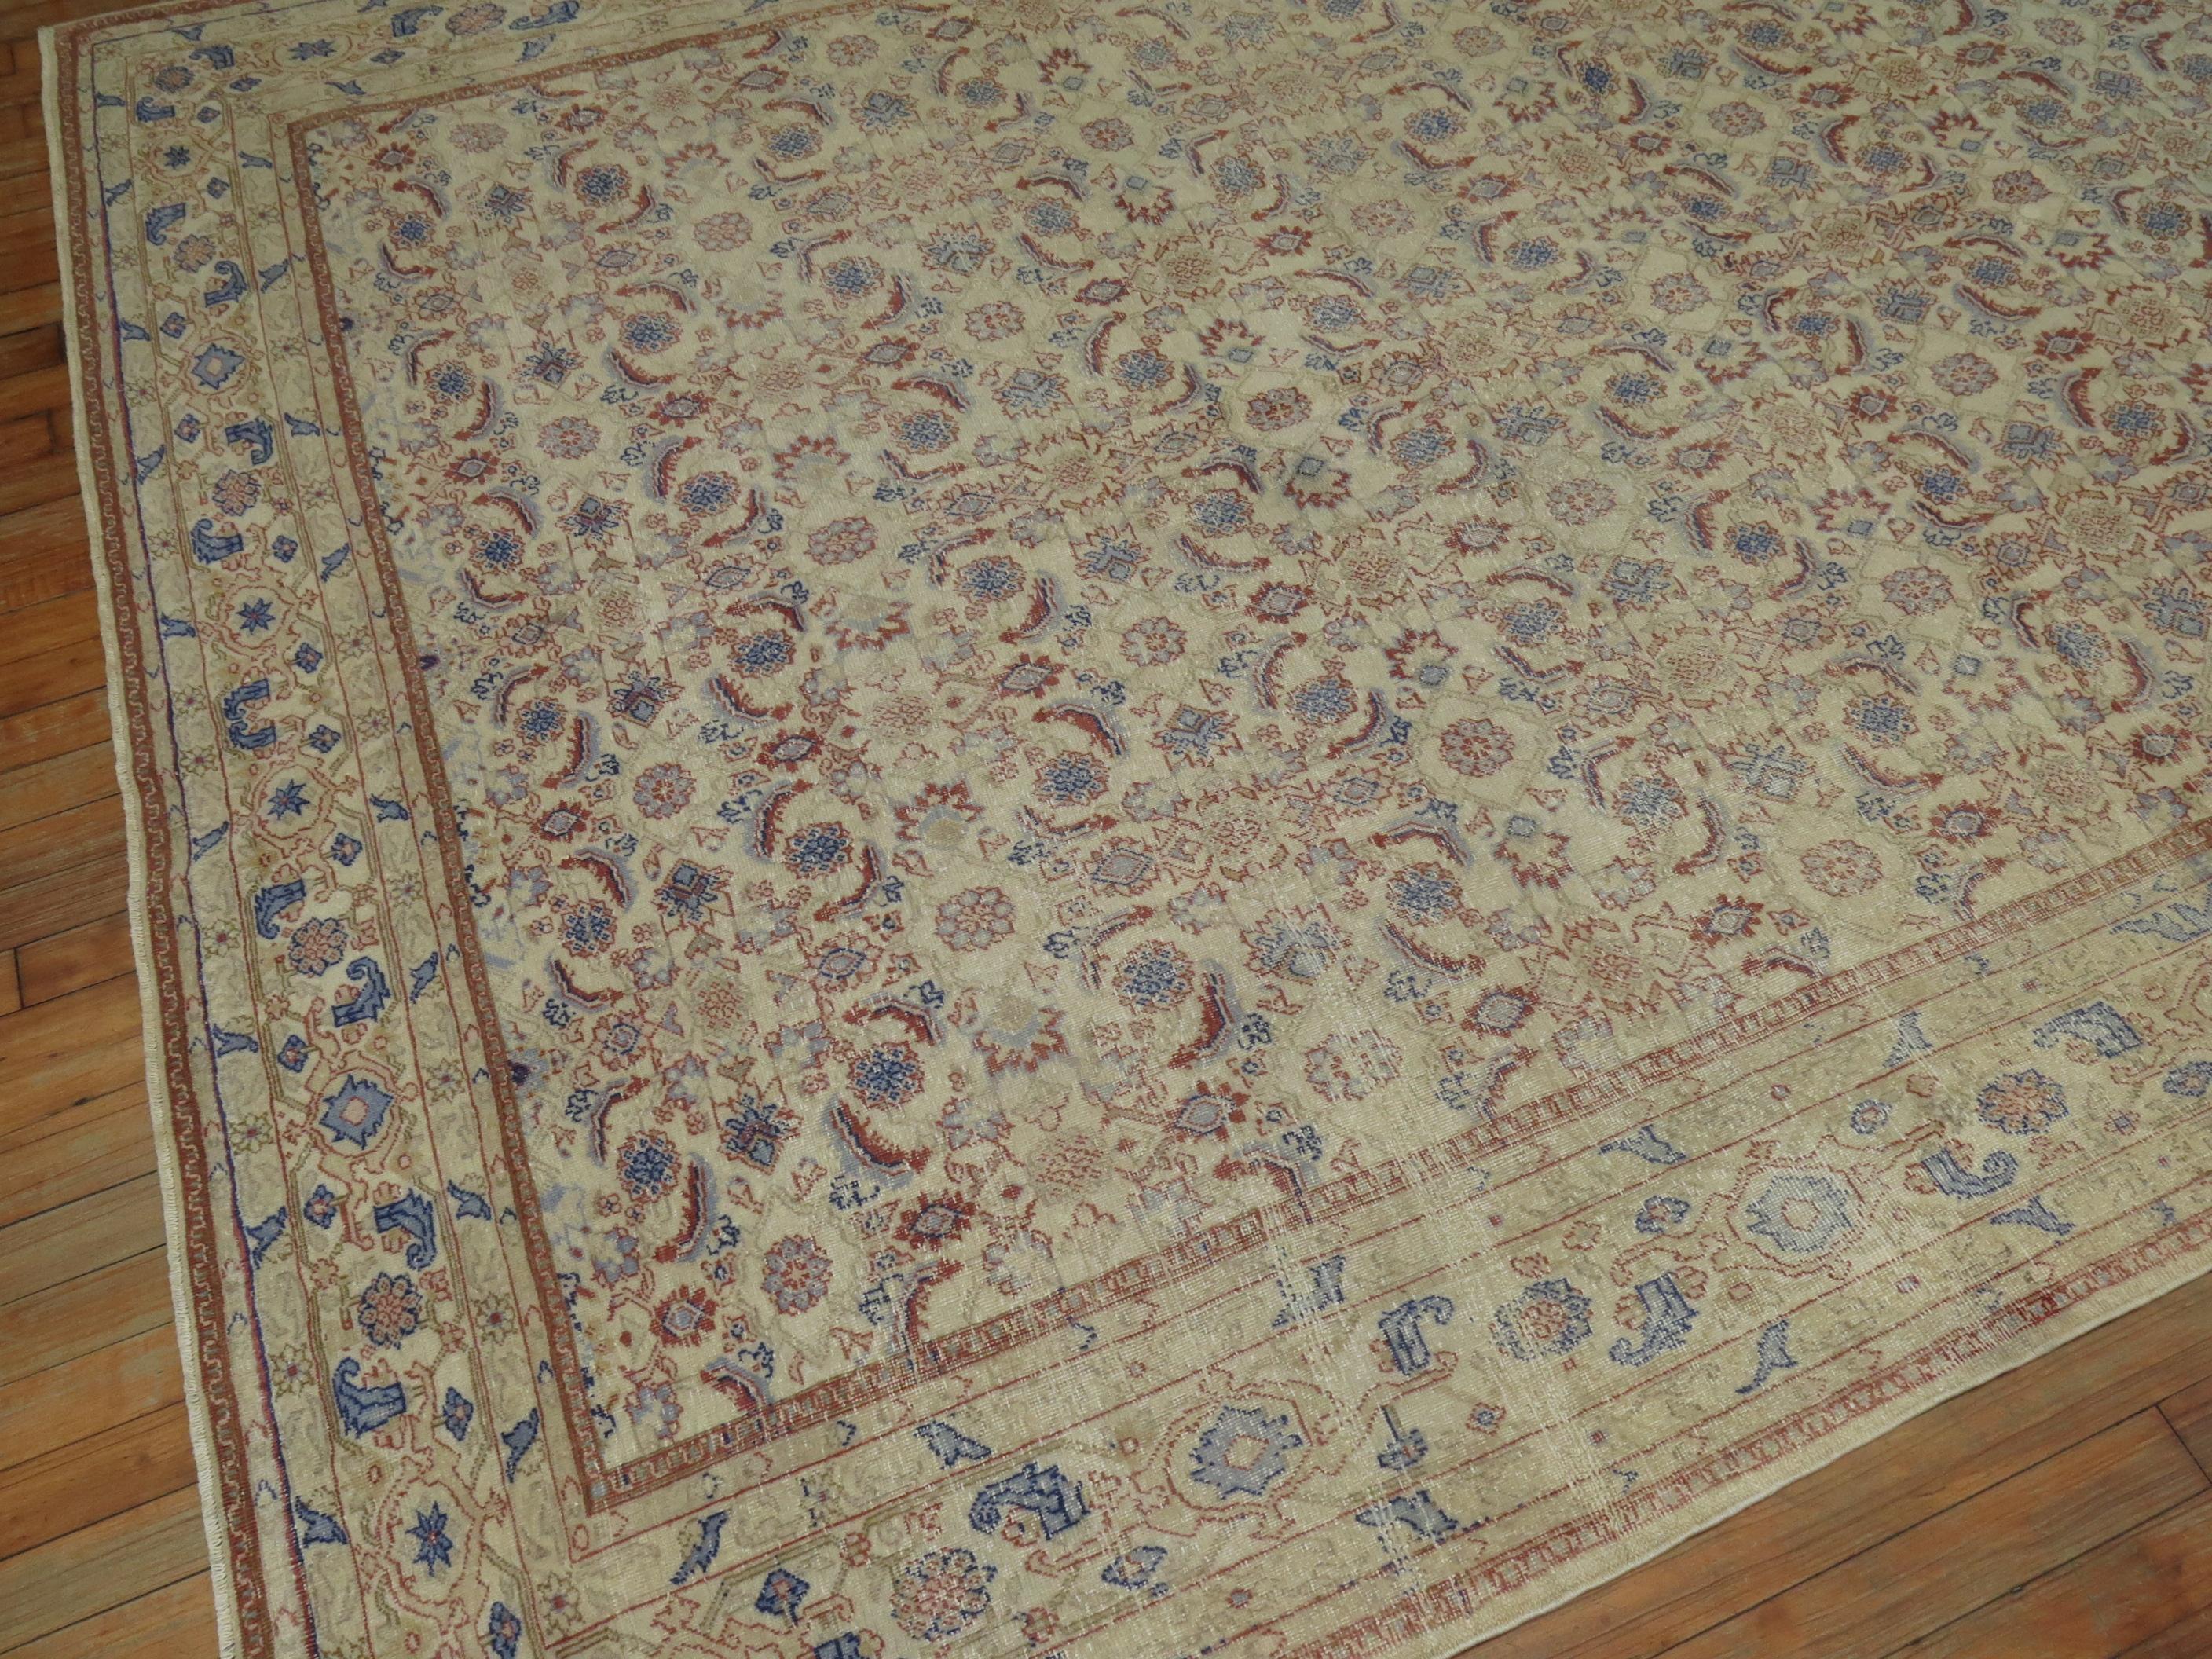 Mid 20th-century Turkish rug with a Herati motif in a clay color, accents in blue on a neutral beige field

Measures: 6'7'' x 9'1''.